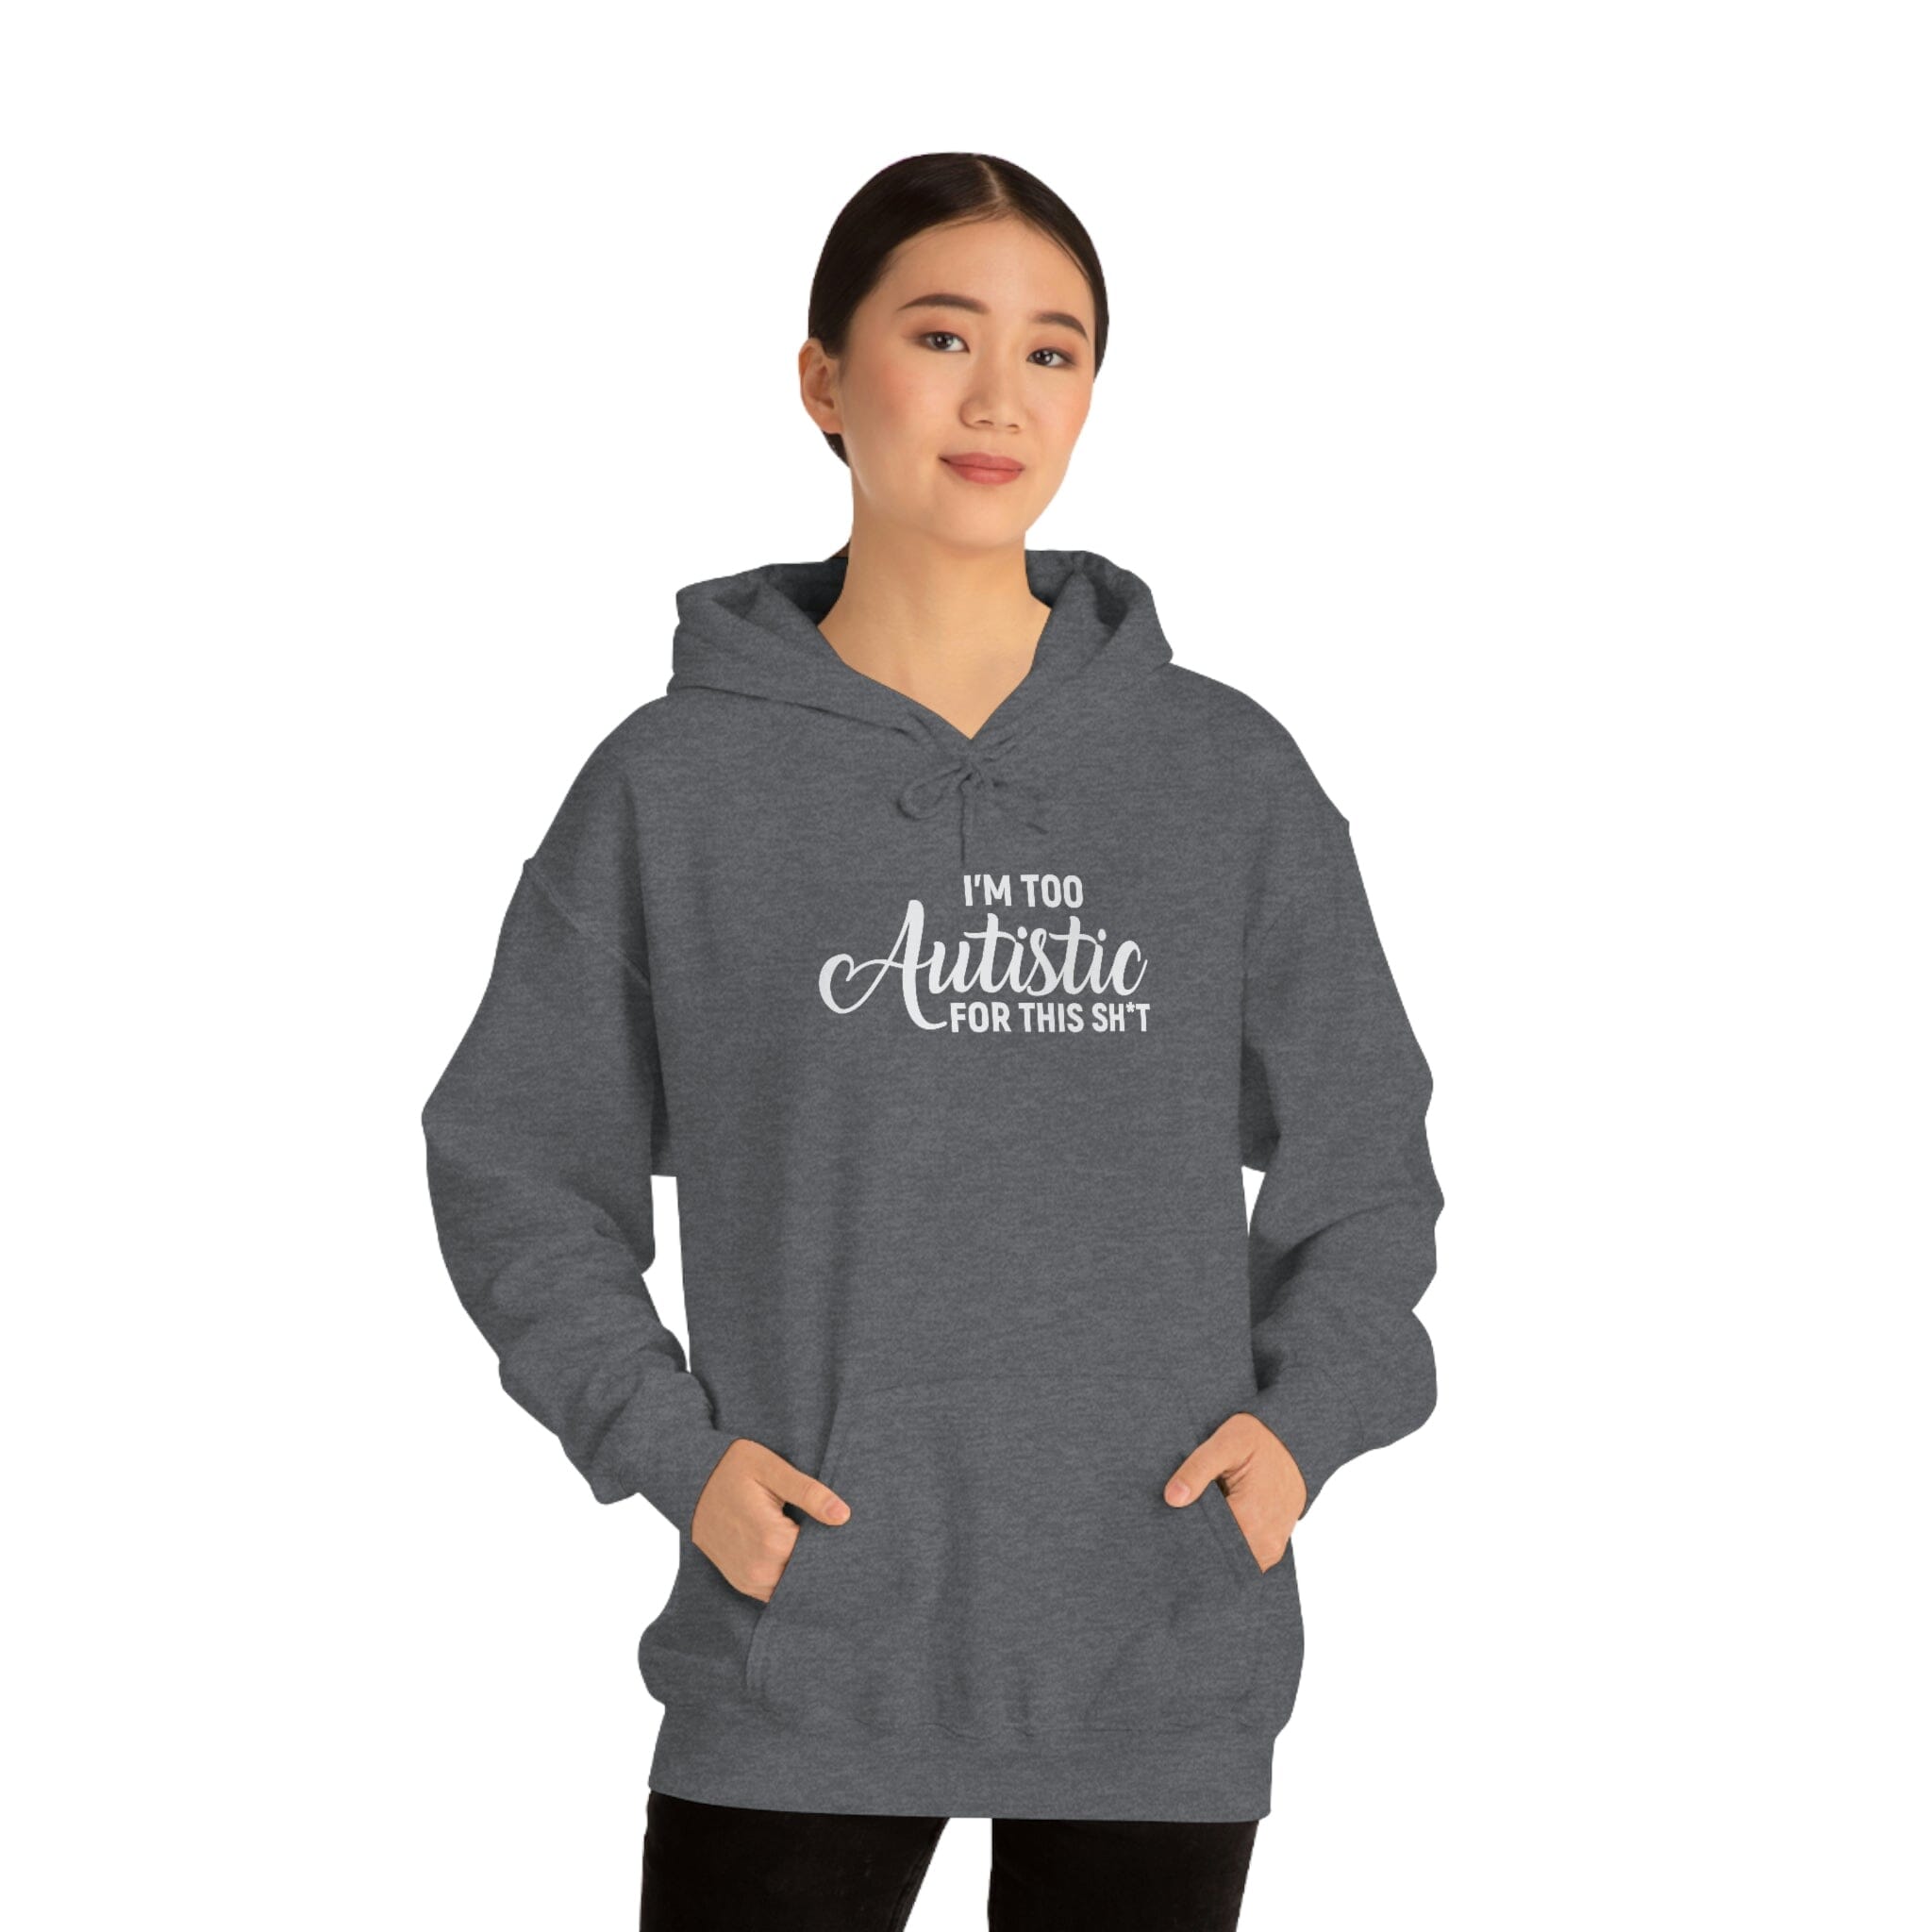 I'm Too Autistic for This Sh*t Unisex Hoodie Hoodie The Autistic Innovator 